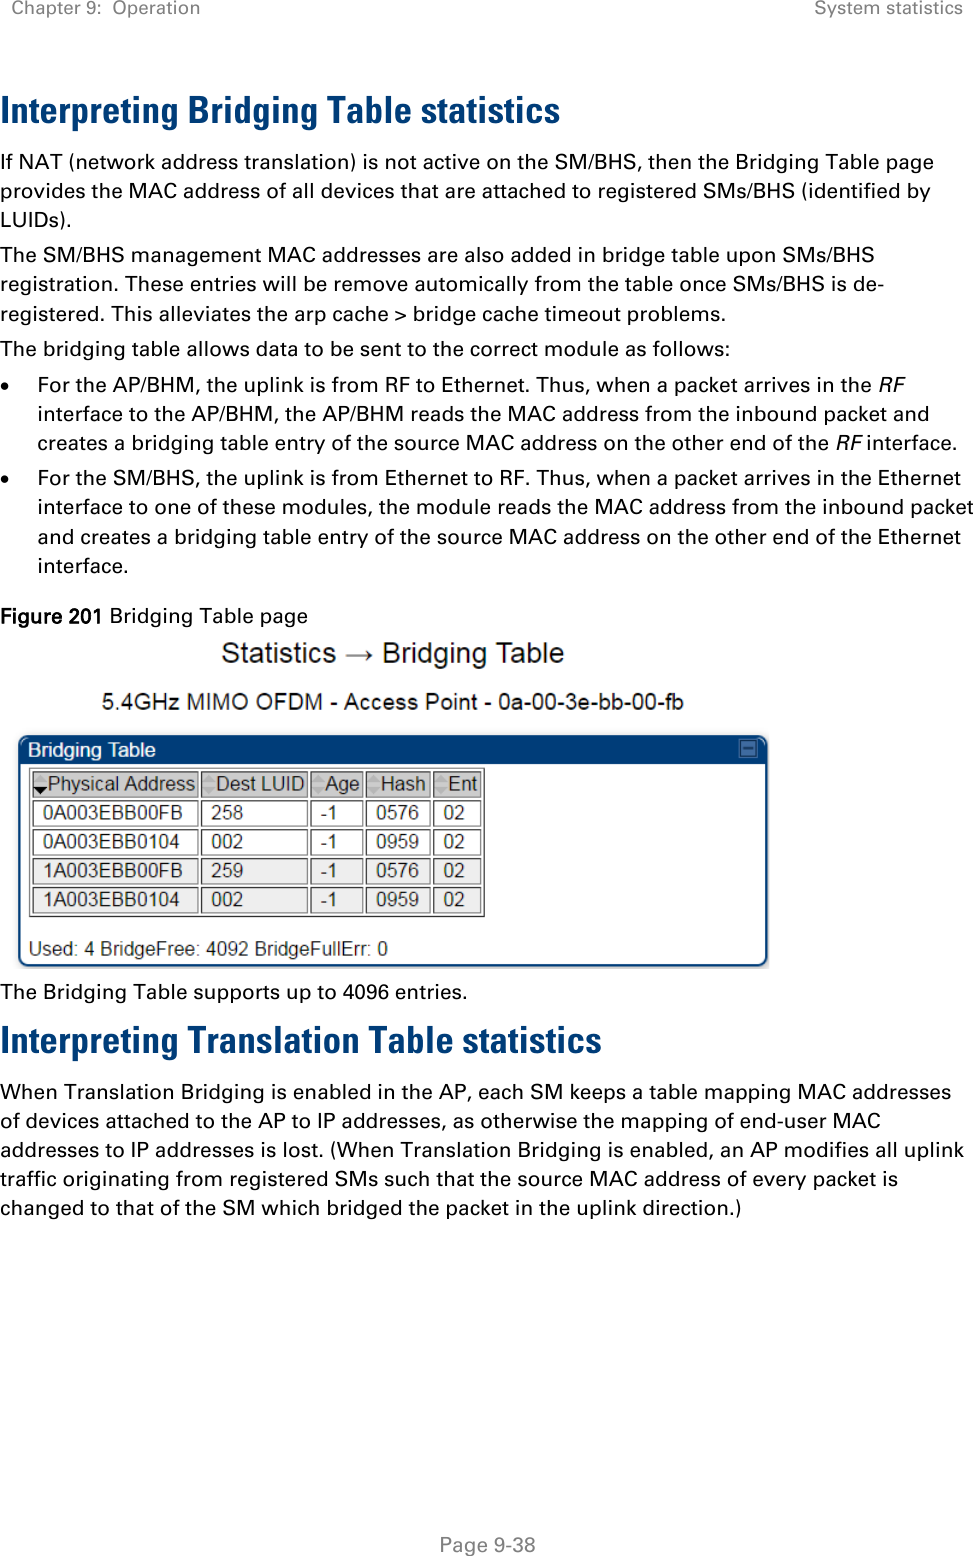 Chapter 9:  Operation System statistics   Page 9-38 Interpreting Bridging Table statistics If NAT (network address translation) is not active on the SM/BHS, then the Bridging Table page provides the MAC address of all devices that are attached to registered SMs/BHS (identified by LUIDs).  The SM/BHS management MAC addresses are also added in bridge table upon SMs/BHS registration. These entries will be remove automically from the table once SMs/BHS is de-registered. This alleviates the arp cache &gt; bridge cache timeout problems. The bridging table allows data to be sent to the correct module as follows: • For the AP/BHM, the uplink is from RF to Ethernet. Thus, when a packet arrives in the RF interface to the AP/BHM, the AP/BHM reads the MAC address from the inbound packet and creates a bridging table entry of the source MAC address on the other end of the RF interface. • For the SM/BHS, the uplink is from Ethernet to RF. Thus, when a packet arrives in the Ethernet interface to one of these modules, the module reads the MAC address from the inbound packet and creates a bridging table entry of the source MAC address on the other end of the Ethernet interface. Figure 201 Bridging Table page    The Bridging Table supports up to 4096 entries. Interpreting Translation Table statistics When Translation Bridging is enabled in the AP, each SM keeps a table mapping MAC addresses of devices attached to the AP to IP addresses, as otherwise the mapping of end-user MAC addresses to IP addresses is lost. (When Translation Bridging is enabled, an AP modifies all uplink traffic originating from registered SMs such that the source MAC address of every packet is changed to that of the SM which bridged the packet in the uplink direction.) 